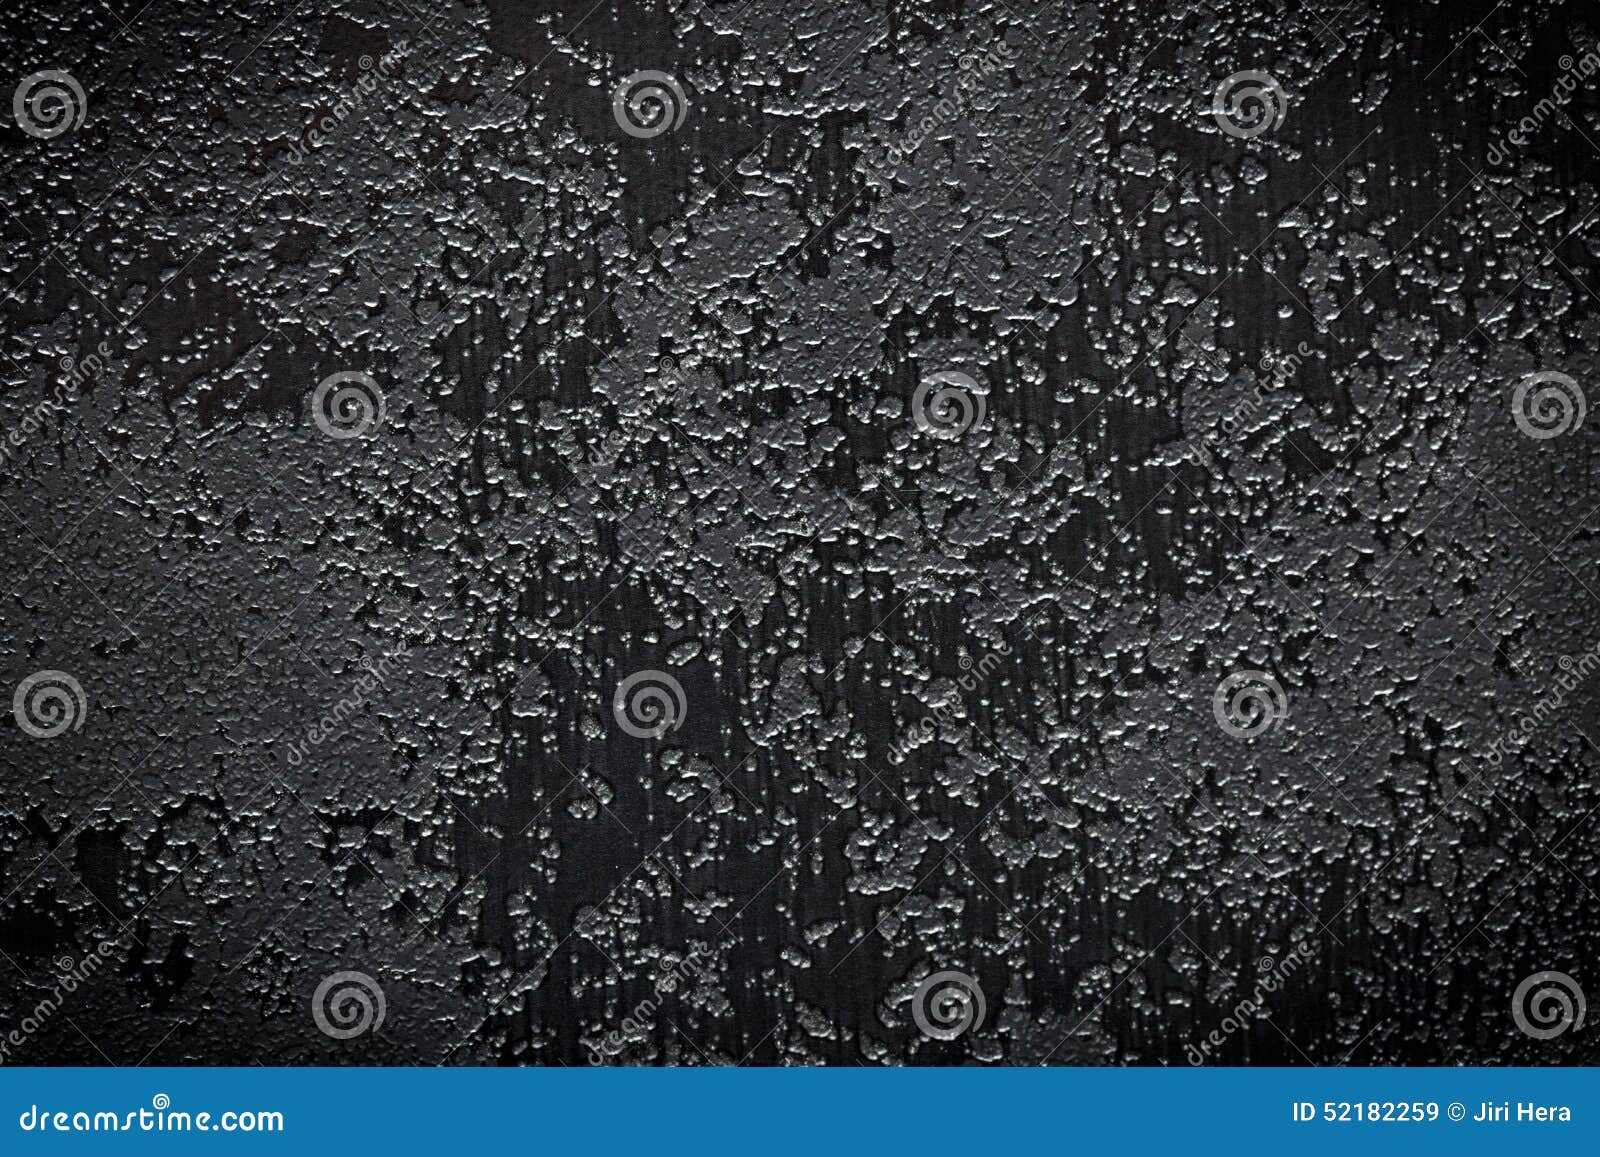 Abstract Black Textured Background Stock Image - Image of closeup